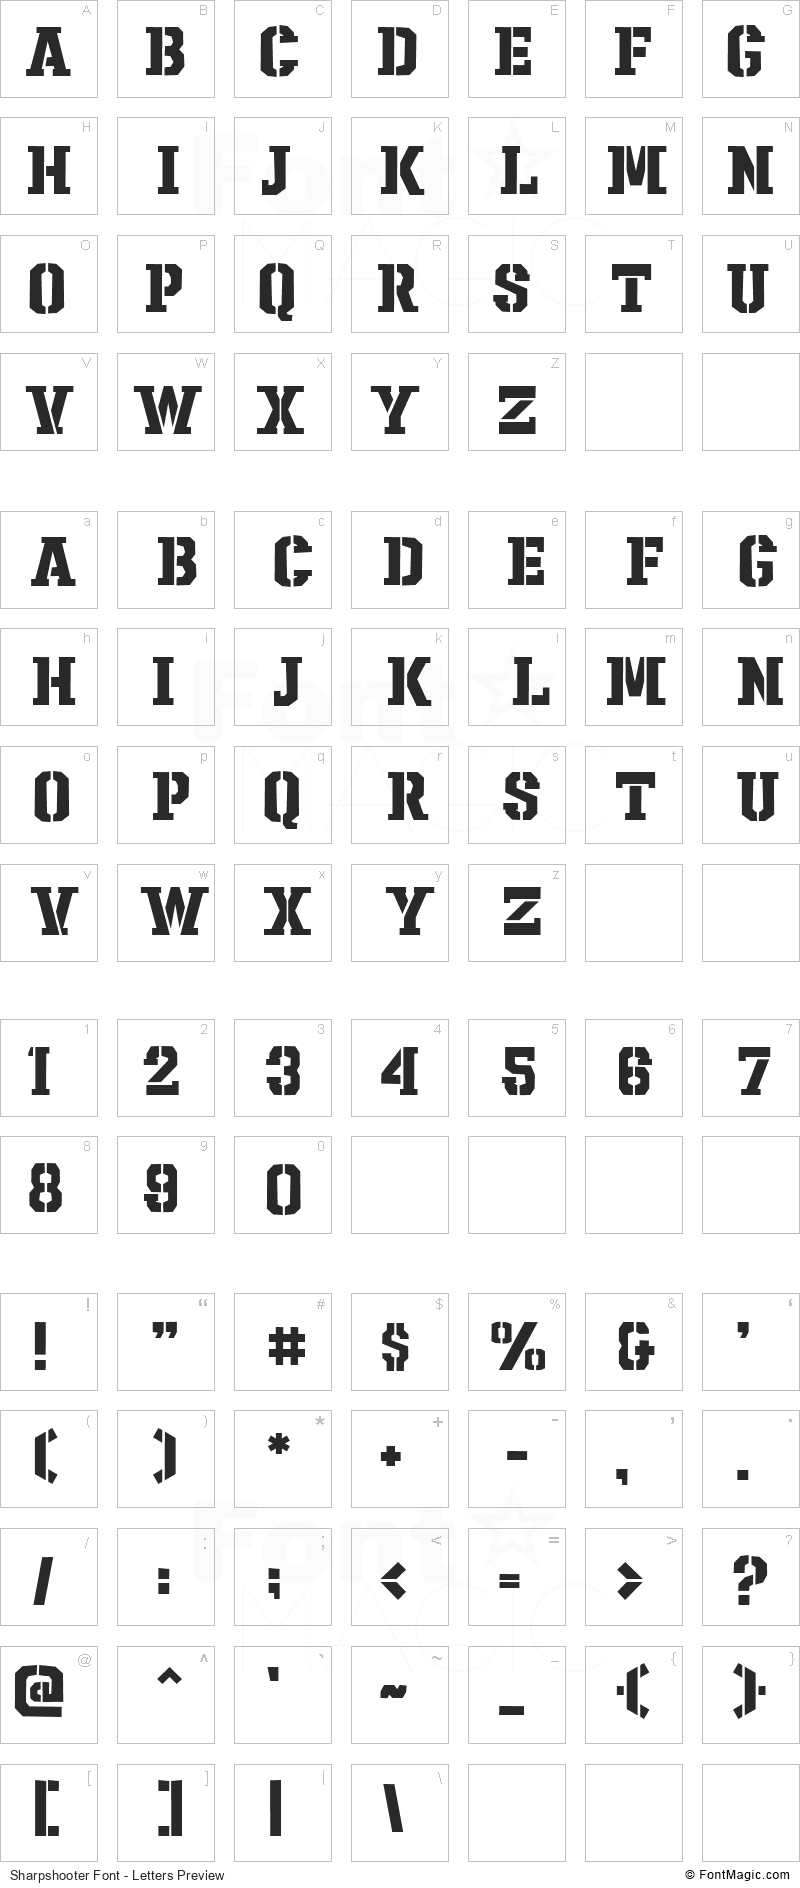 Sharpshooter Font - All Latters Preview Chart